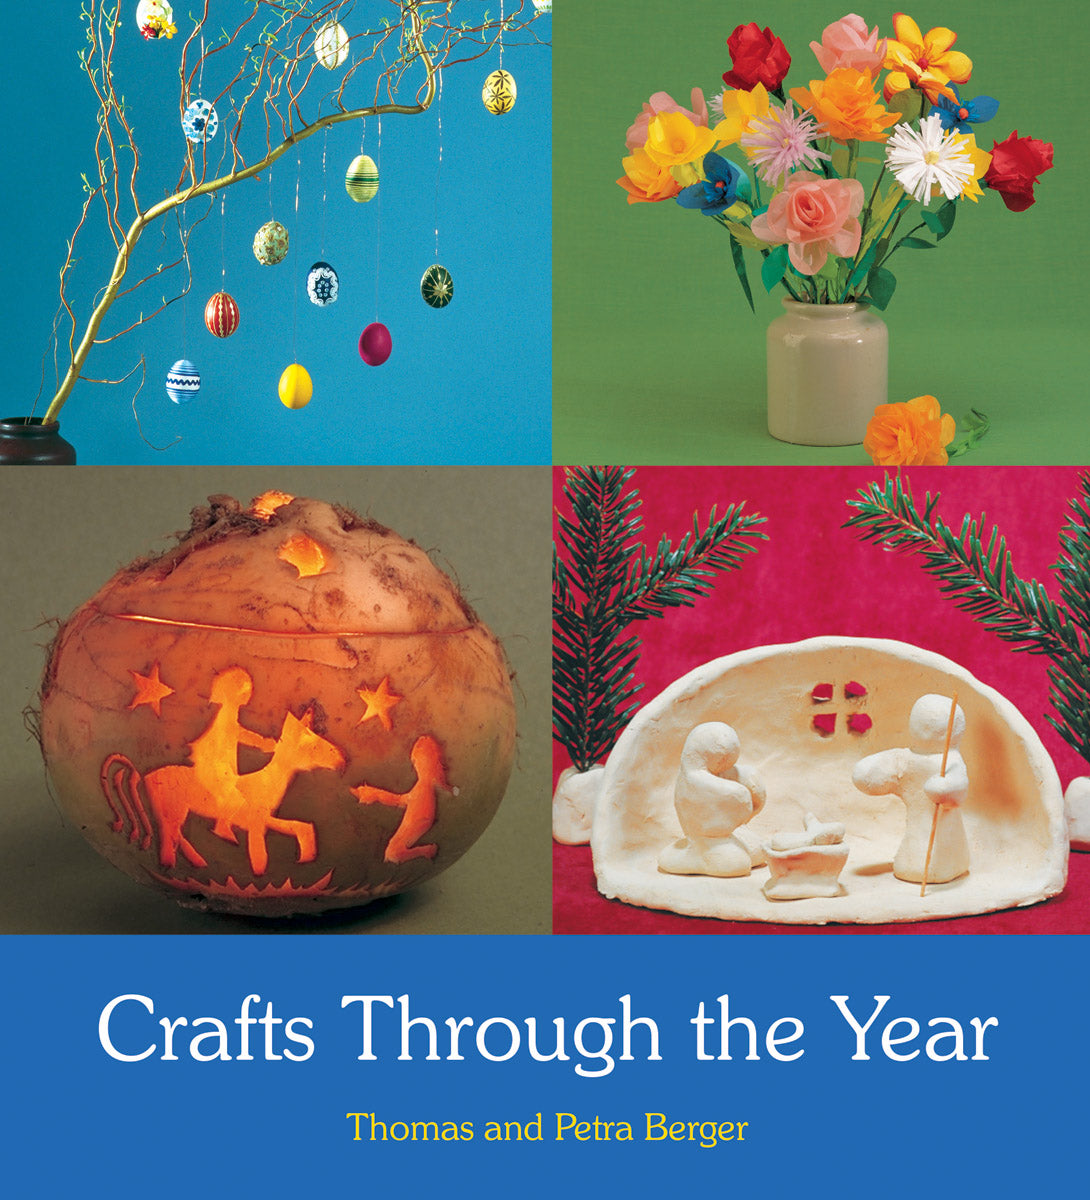 Crafts Through the Year by Thomas and Petra Berger